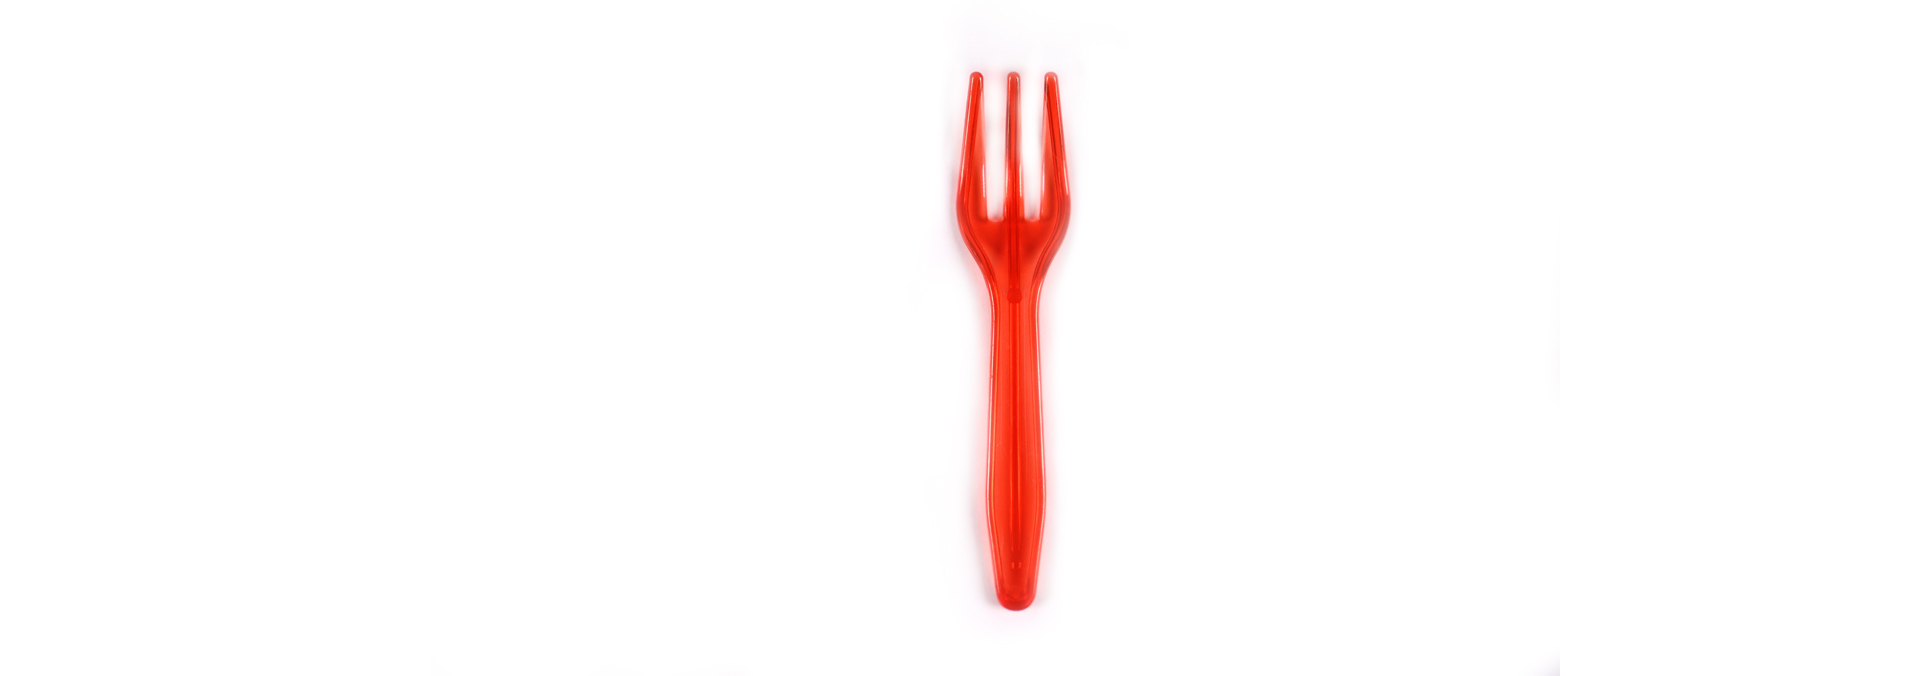 The fork 70